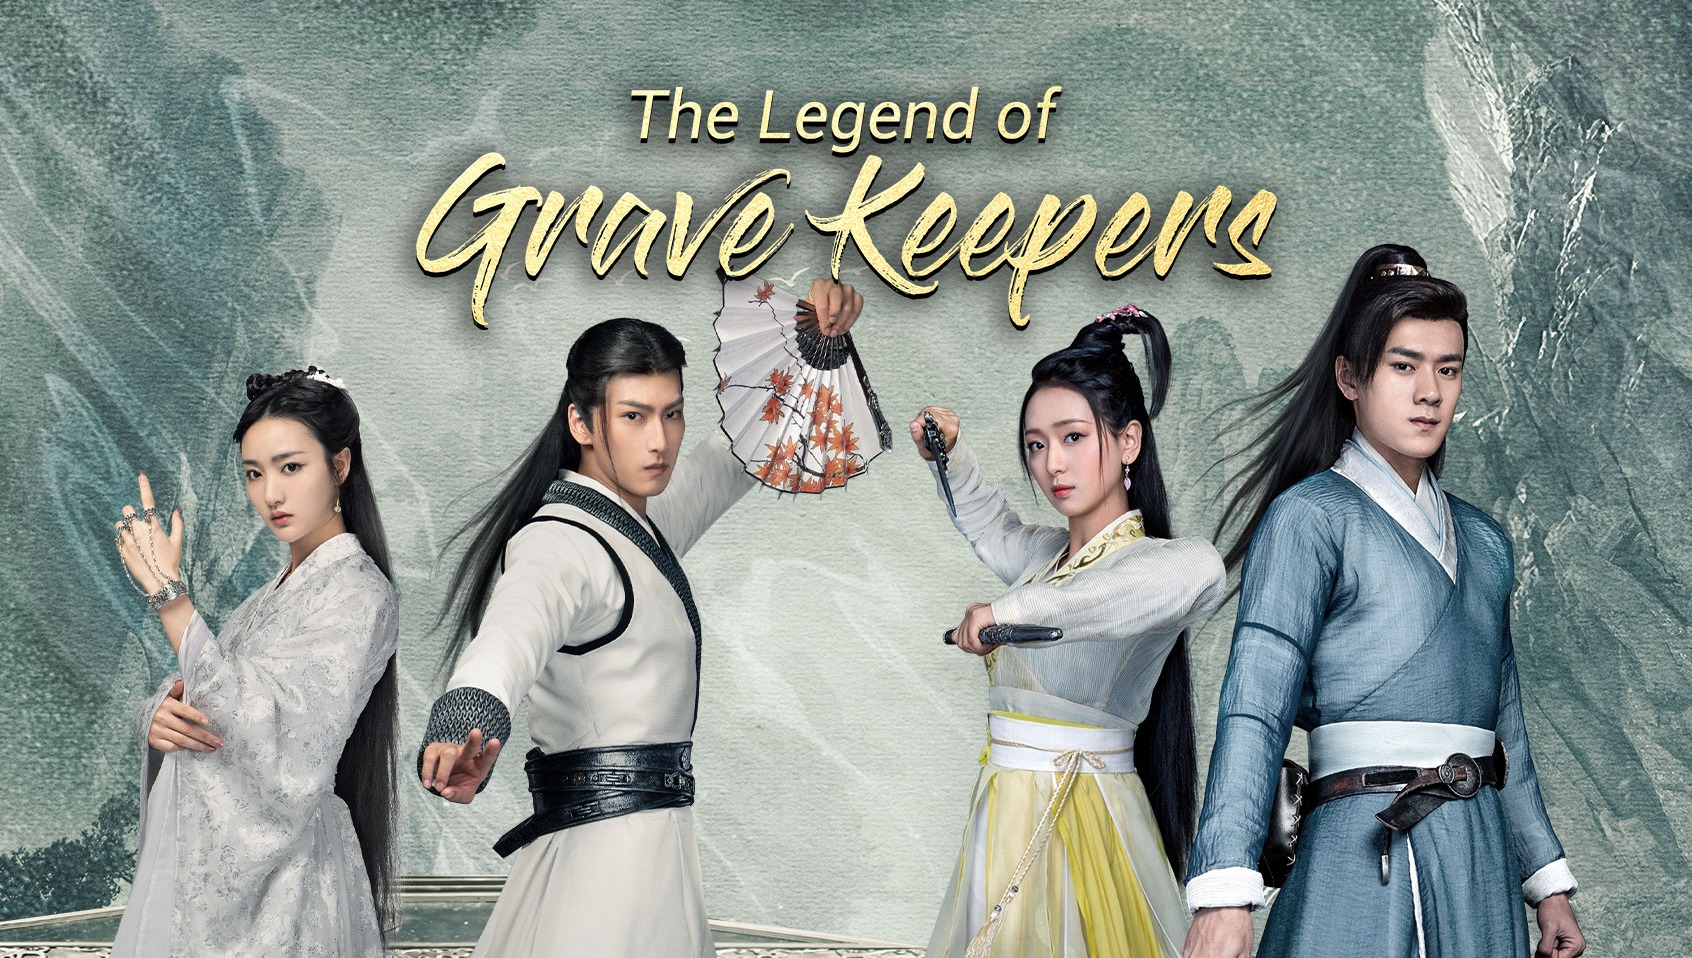 The Legend of Grave Keepers